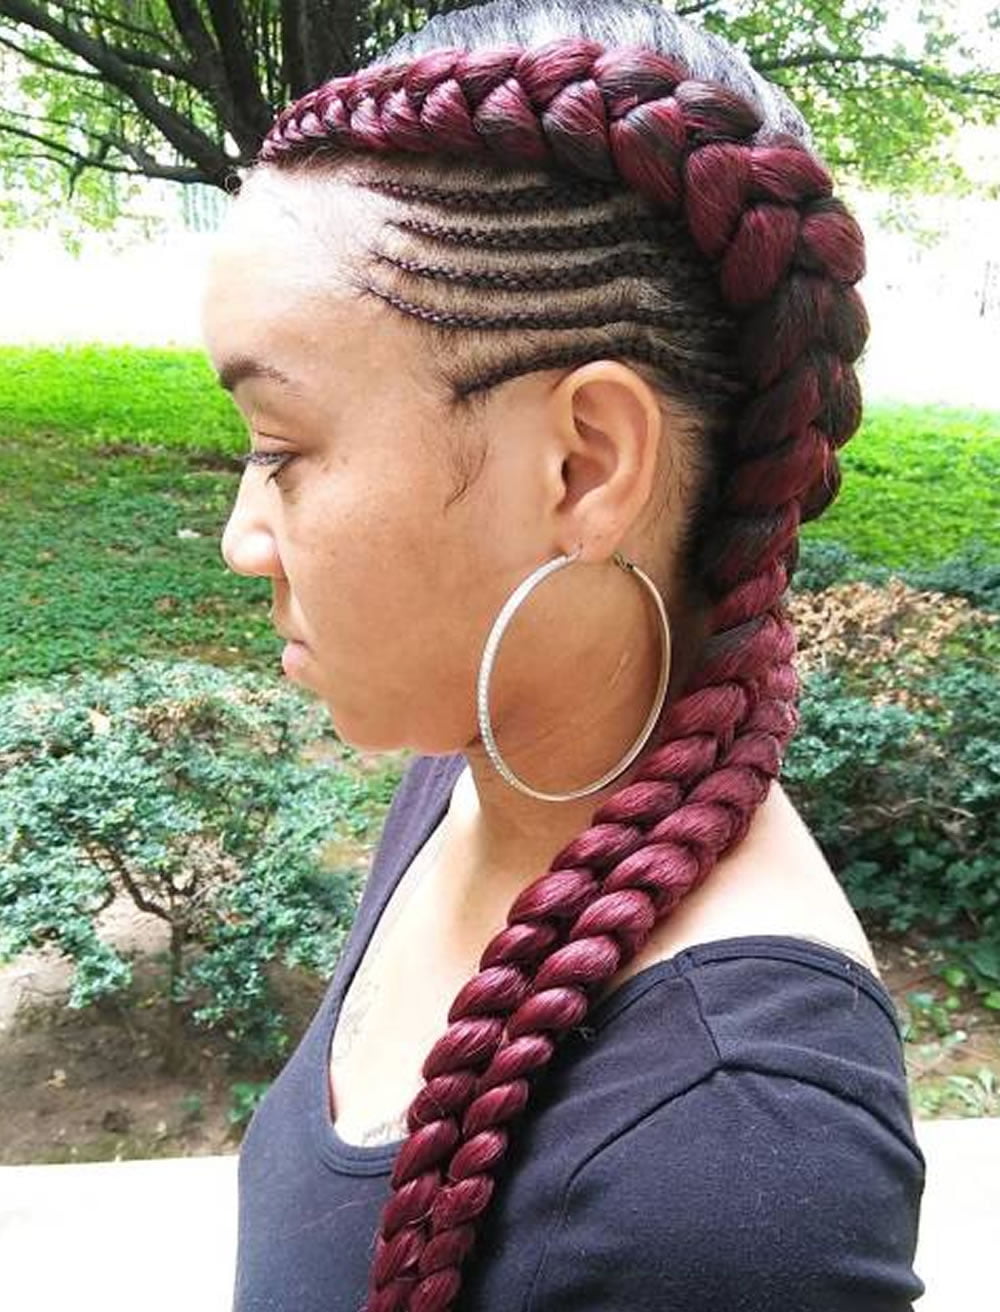 20 Best African American Braided Hairstyles for Women 2020 ...